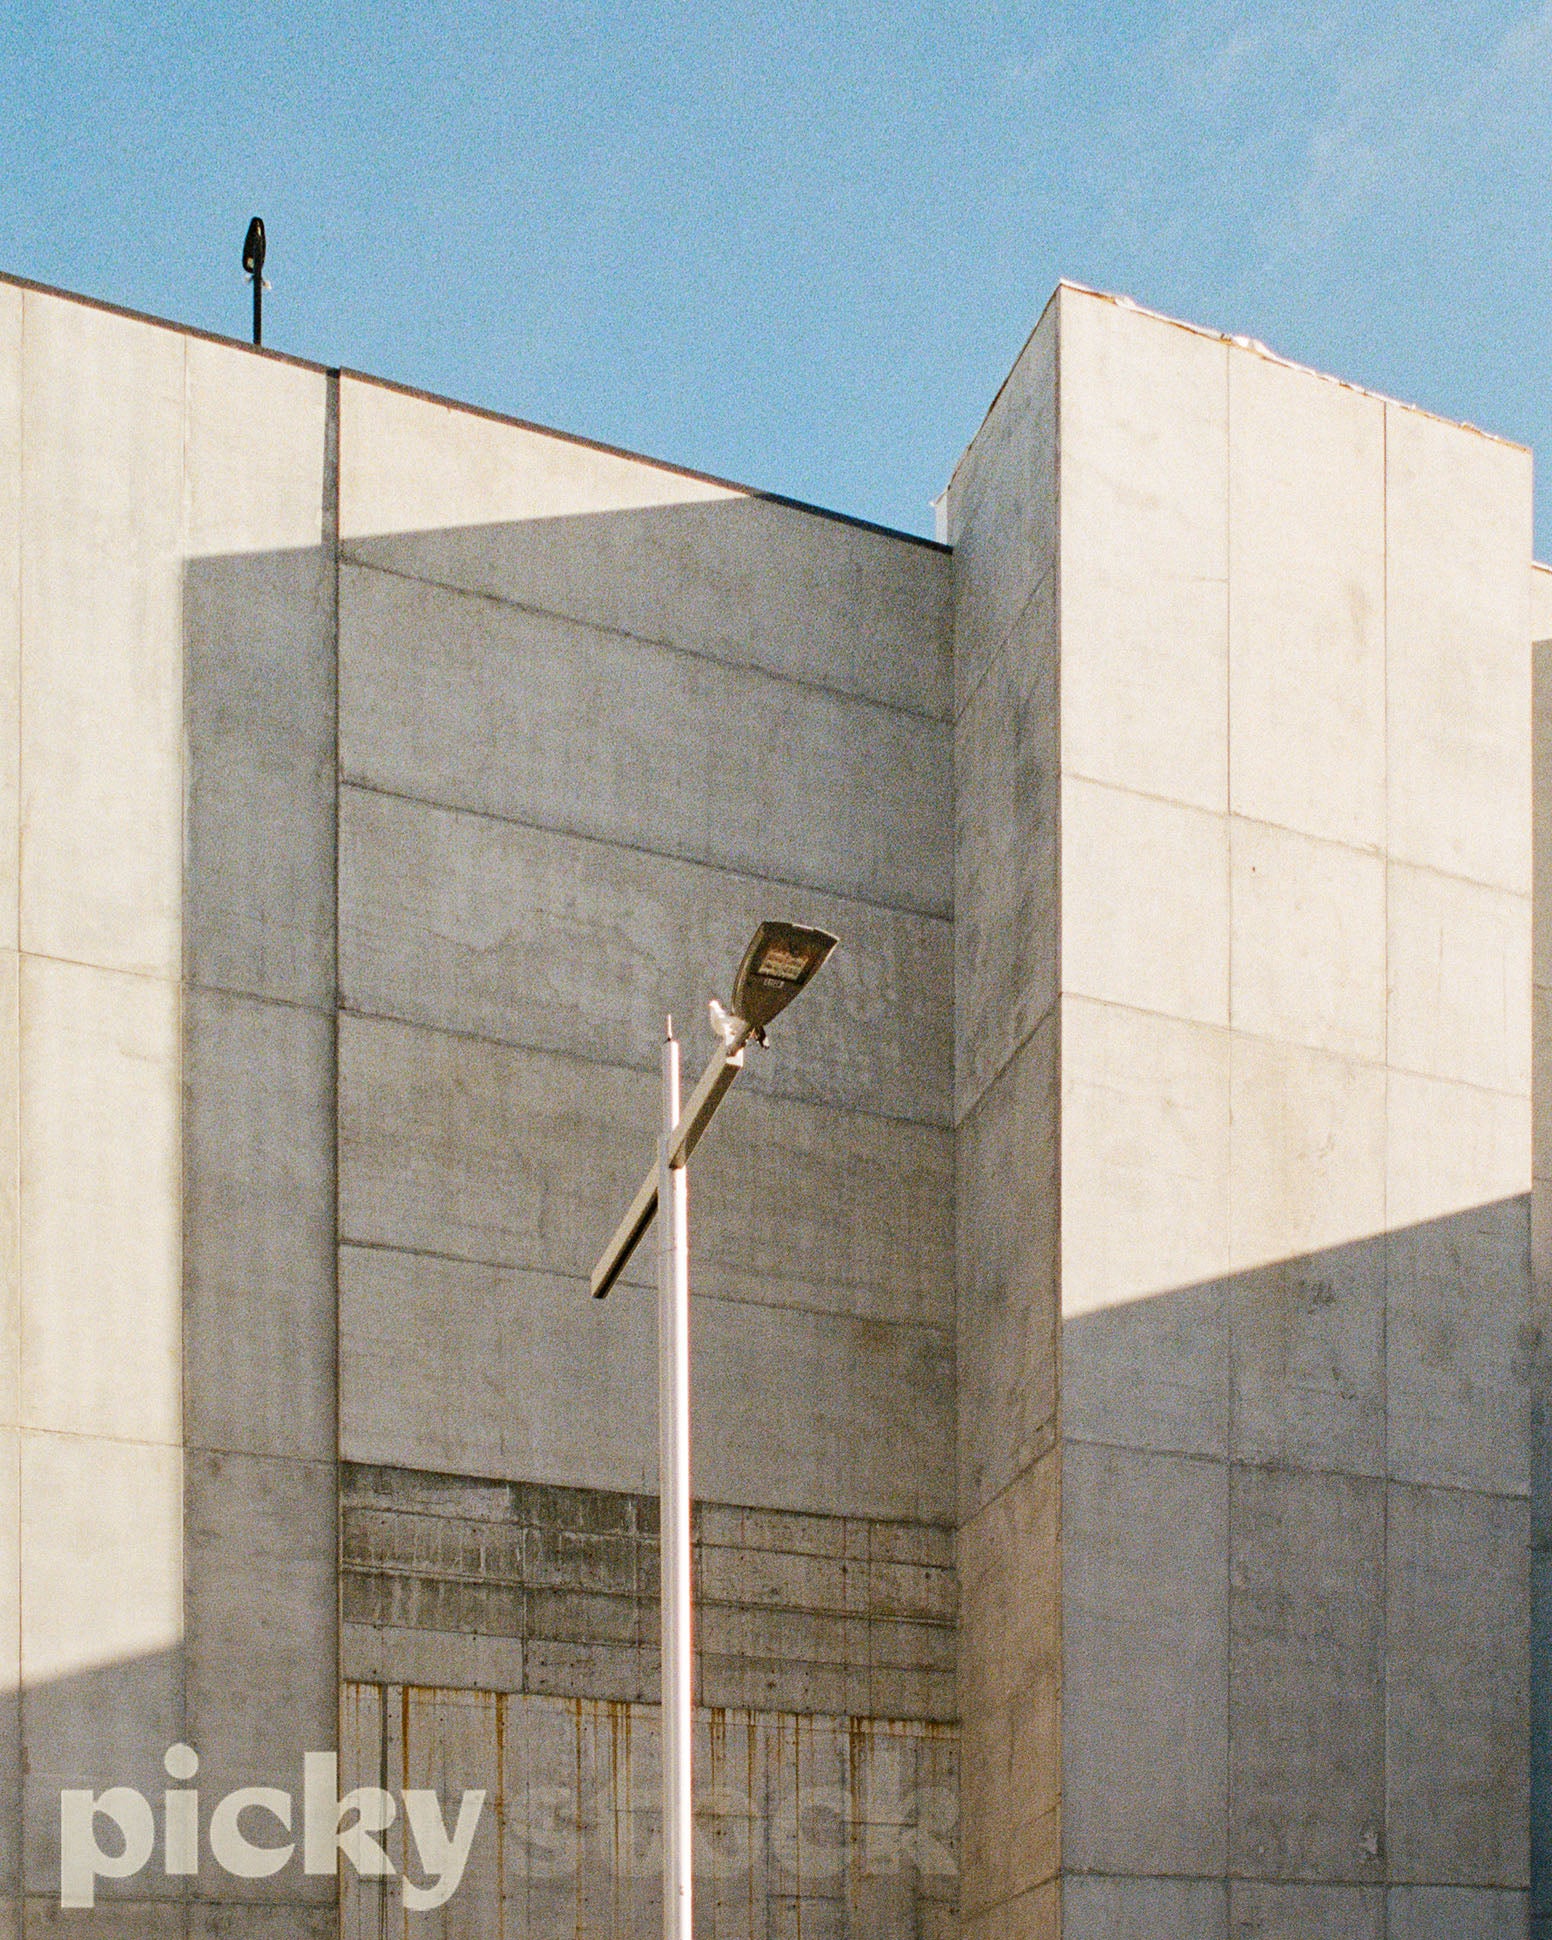 Giant concrete exterior of a car park building. Concrete is a rendered white in large chunks. Sky is blue. Large lamppost middle of frame.